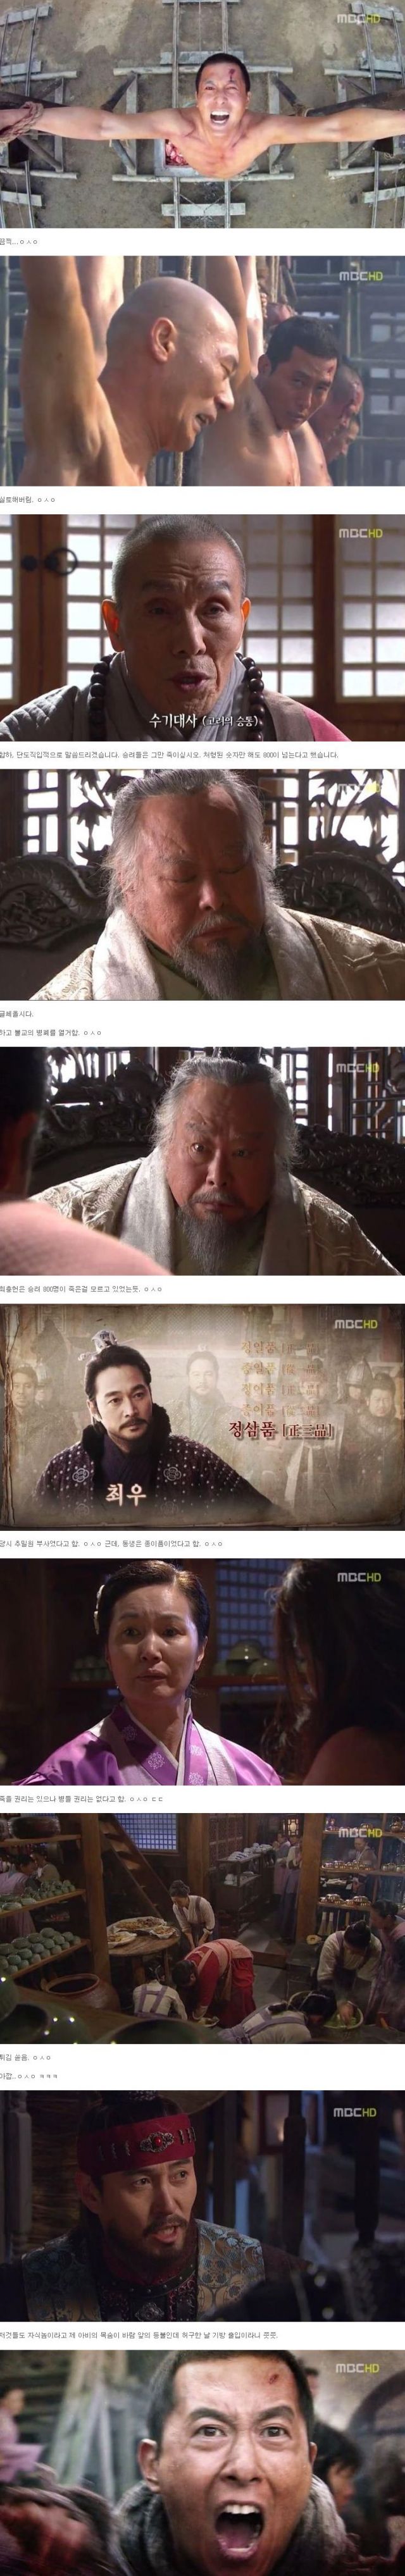 episodes 1 and 2 captures for the Korean drama 'God of War'